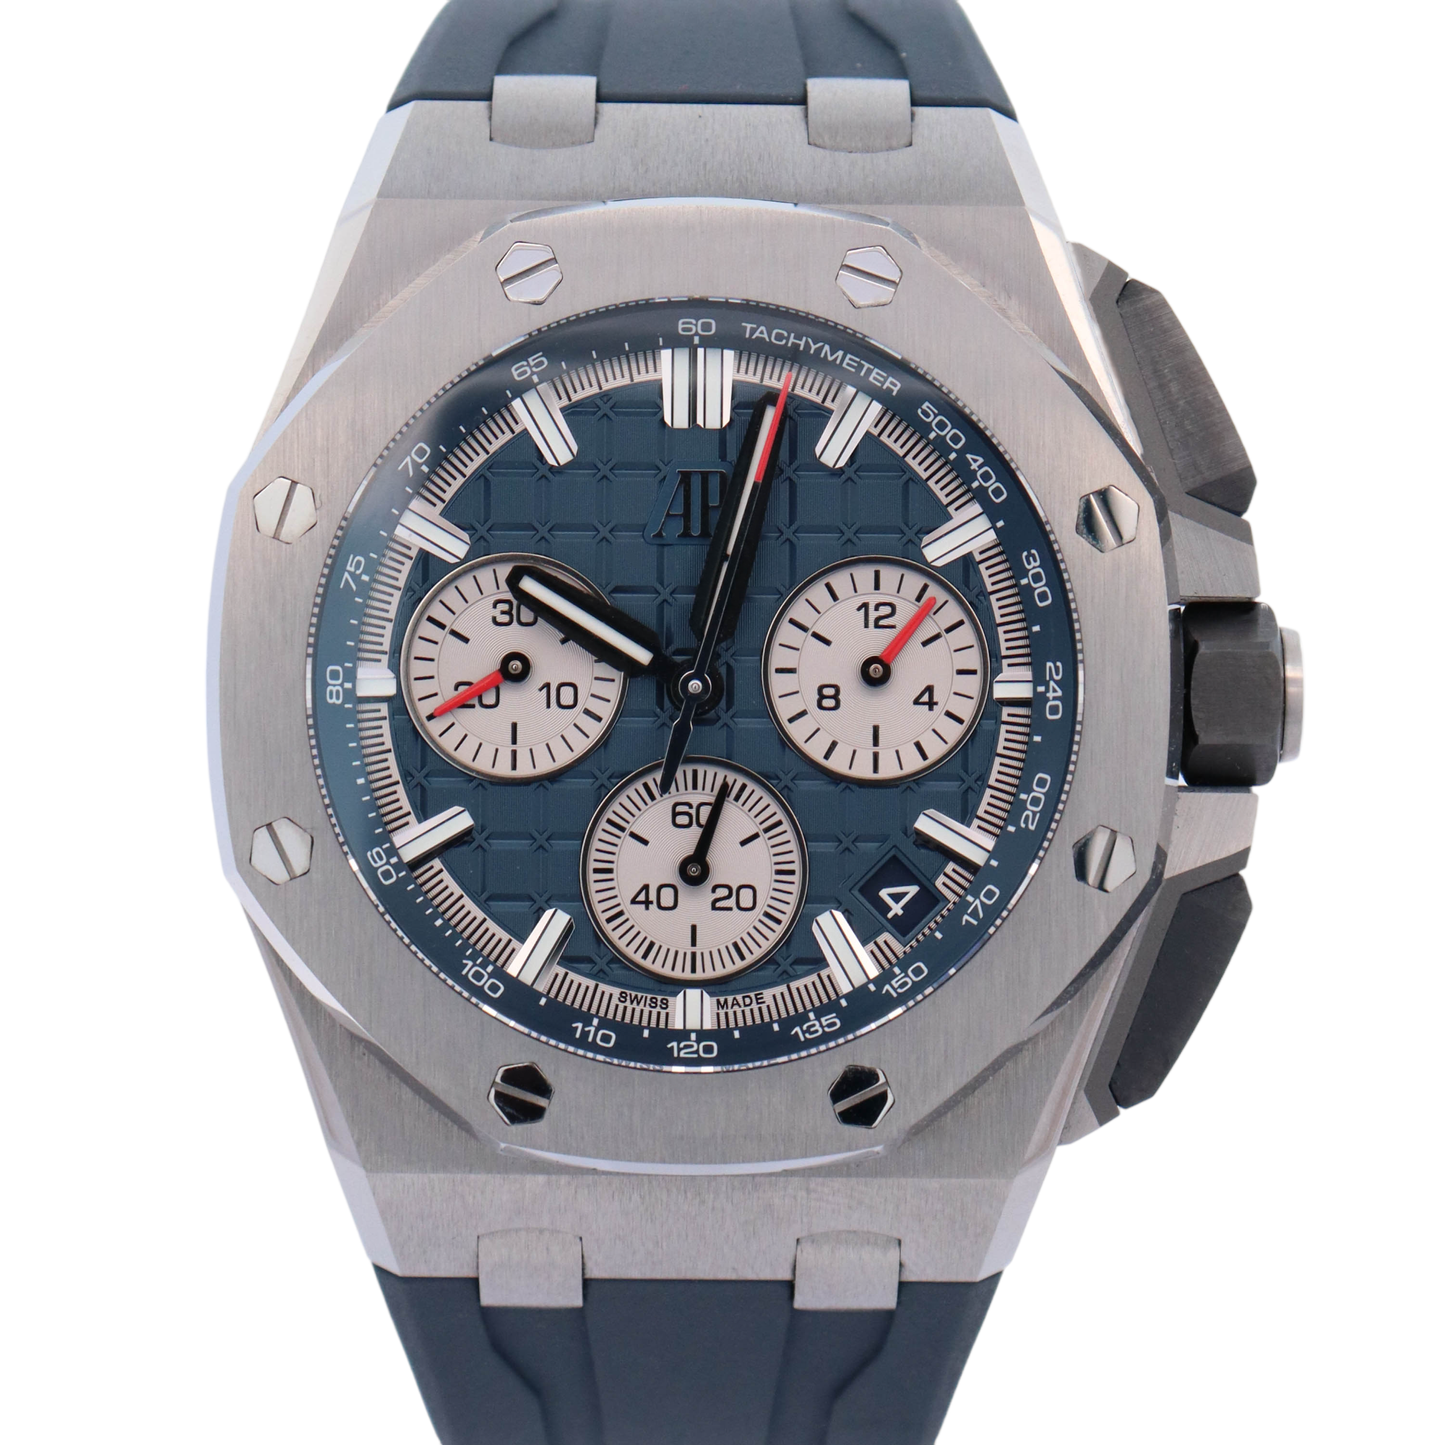 Royal Oak Offshore 43mm Stainless Steel  Blue Chronograph Dial Watch Reference# 26420TI.OO.A027CA.01 - Happy Jewelers Fine Jewelry Lifetime Warranty